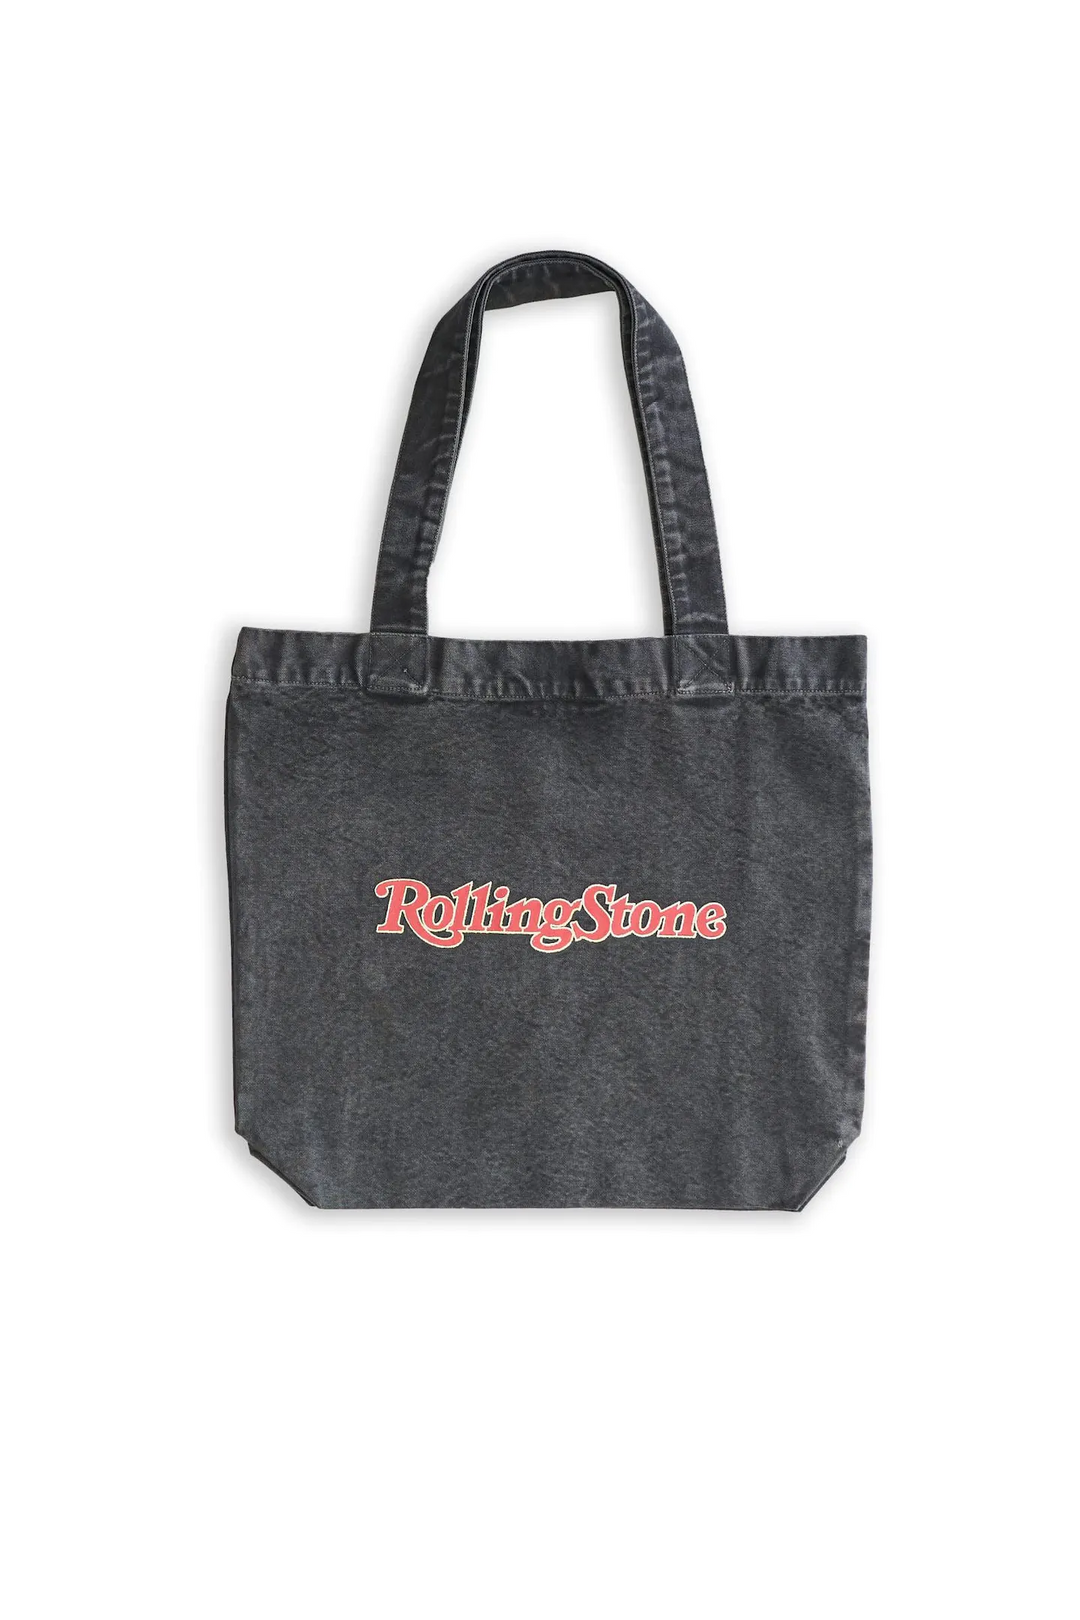 Rolla's - Rolling Stone 1981 Tote - Washed Black